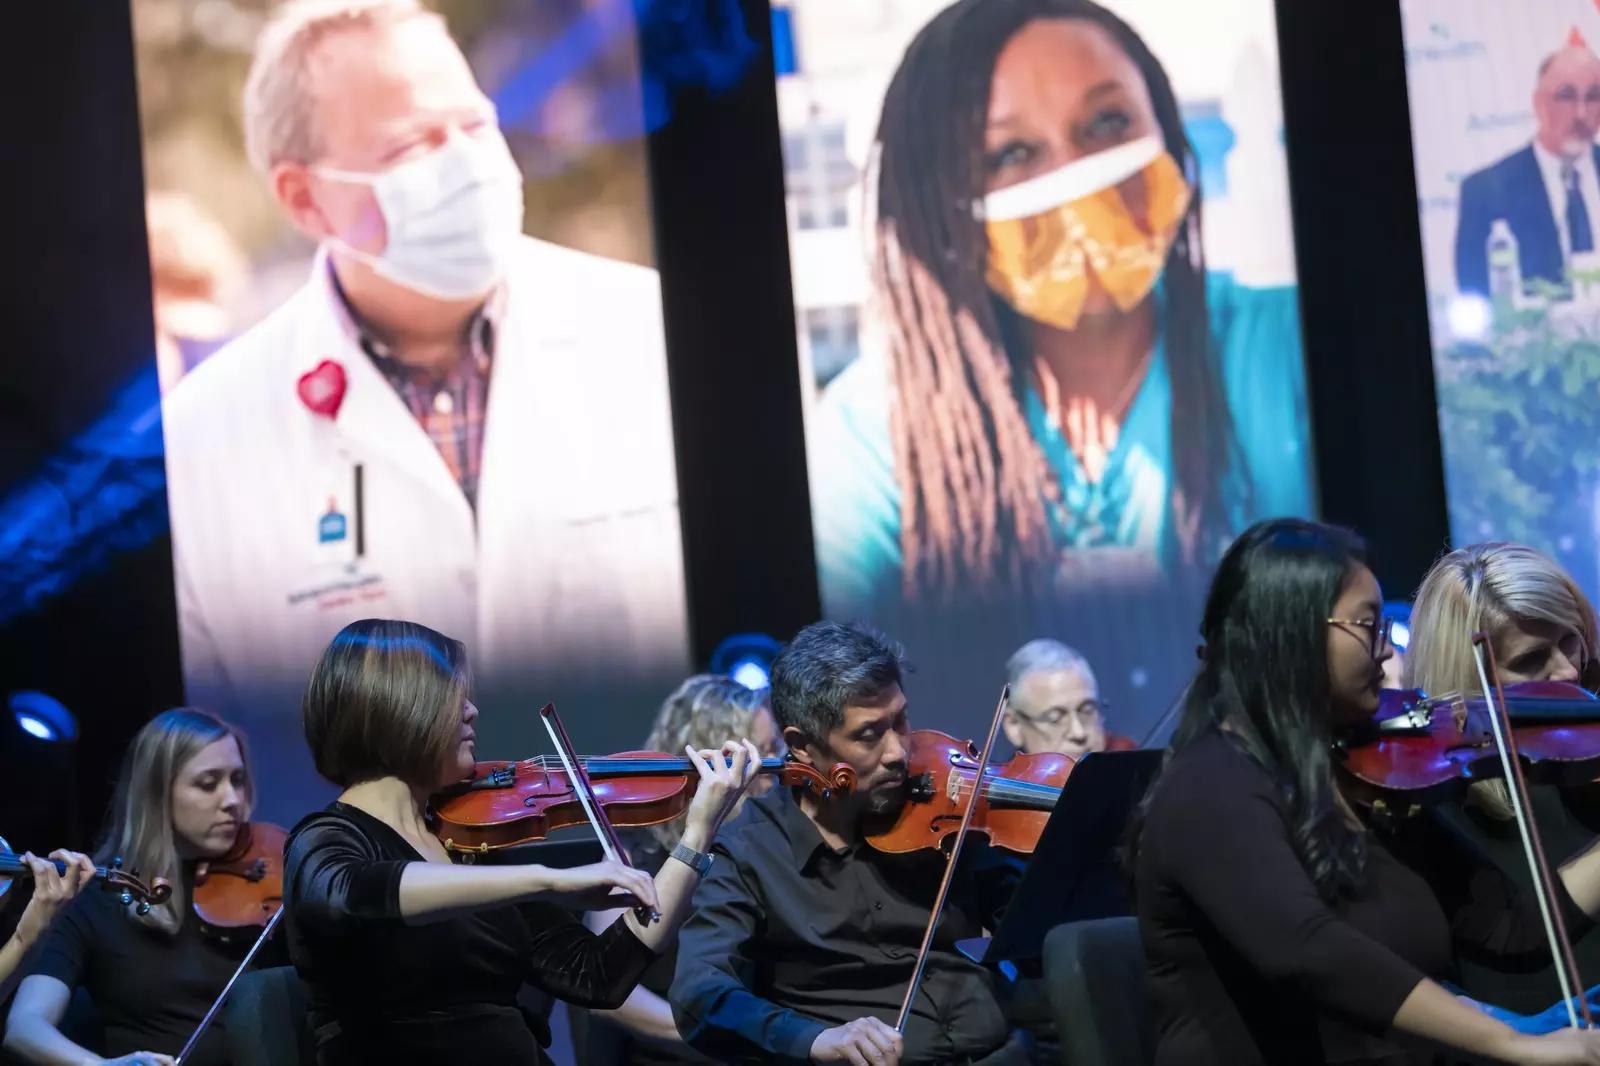 Orchestra helps other feel whole through healing power of music